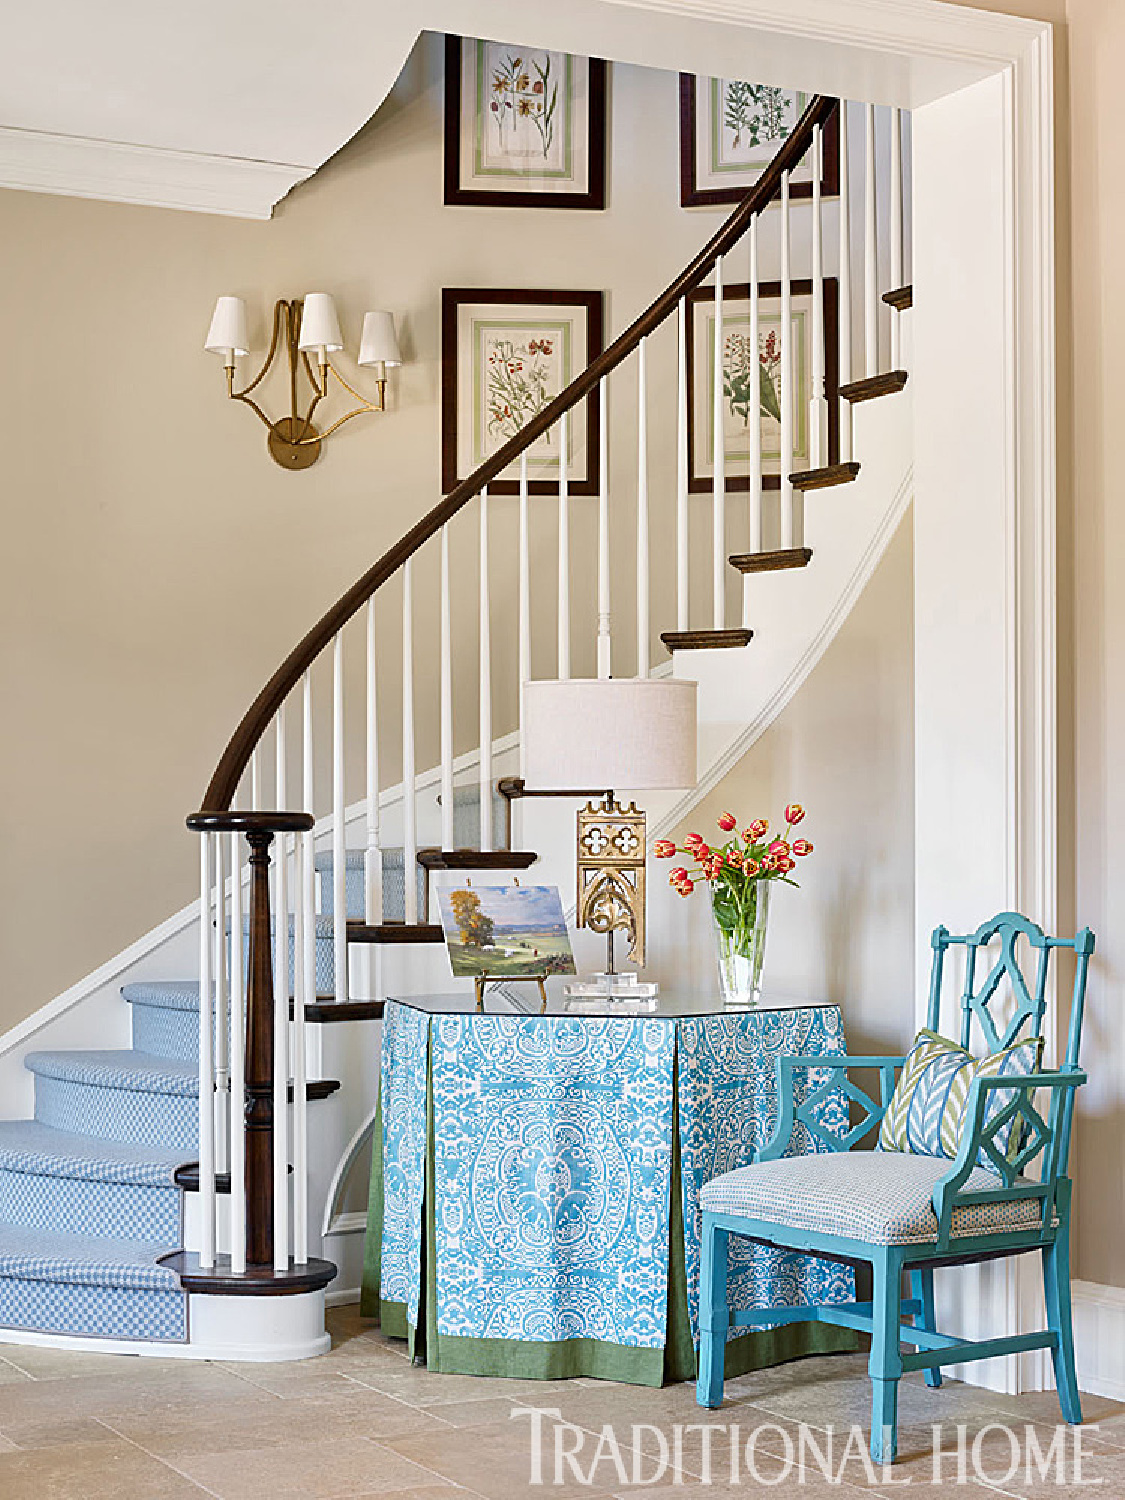 Turquoise skirted table and accents in a traditional entry with sculptural staircase - Traditional Home. #turquoise #foyers